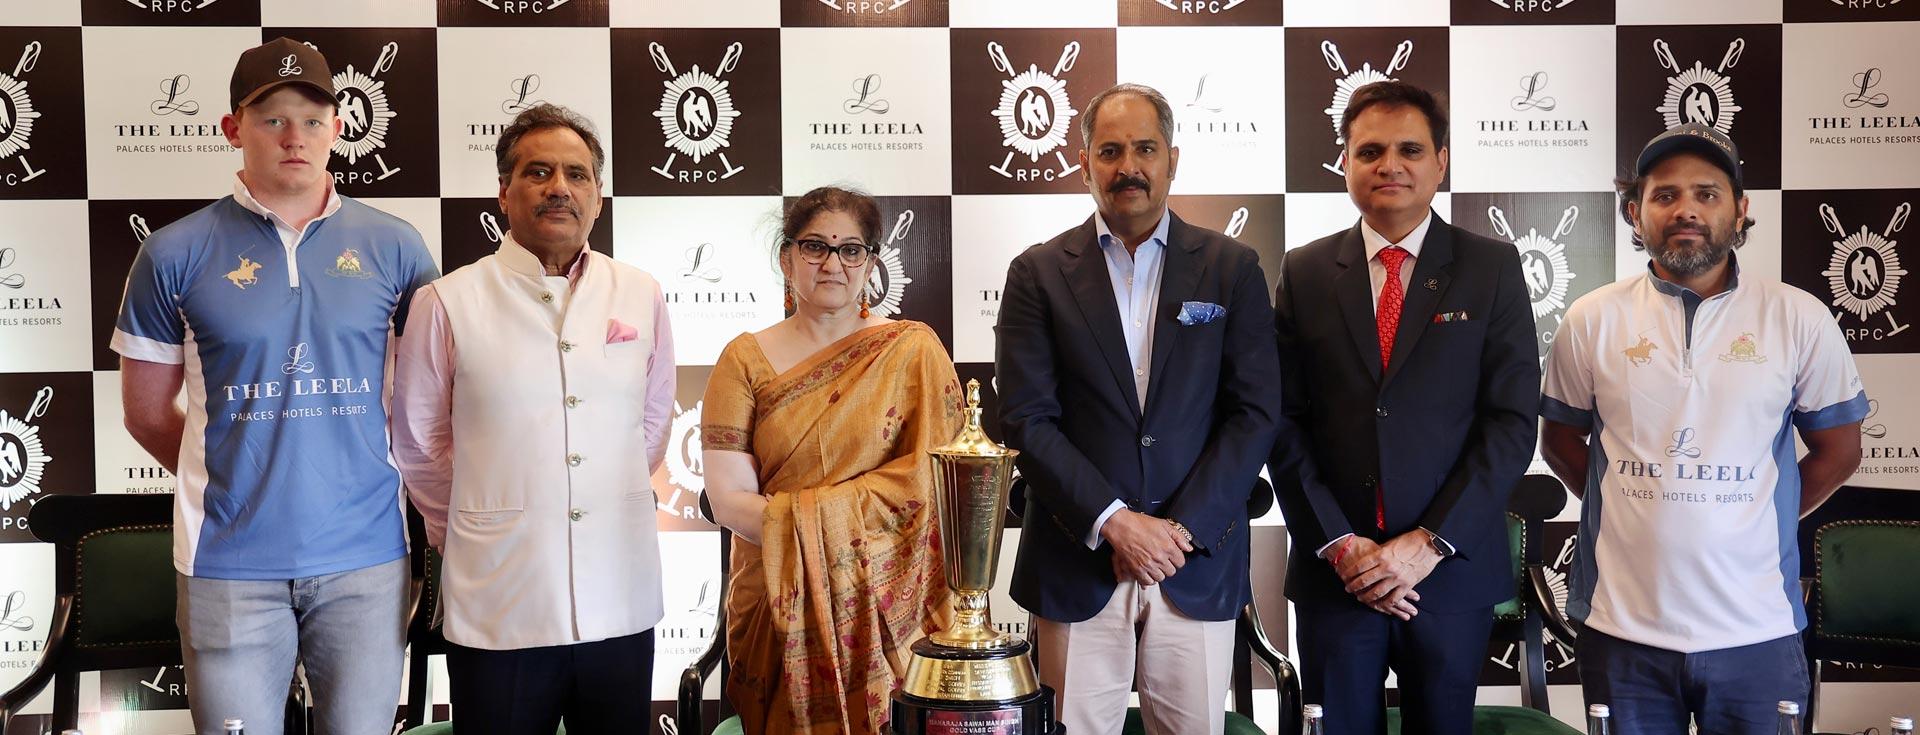 Inaugural sponsorship of The Royal Sport in India